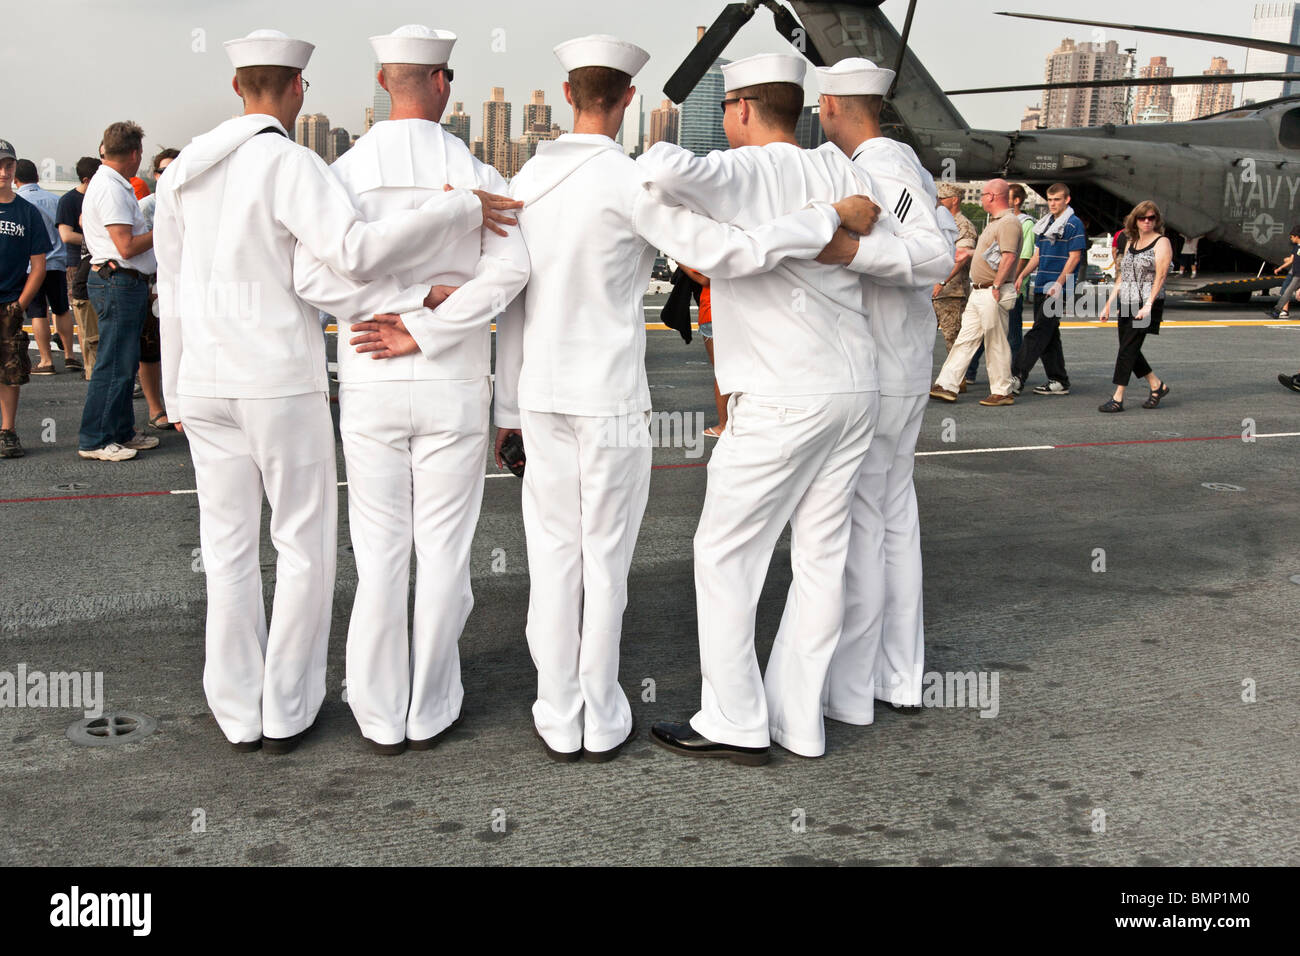 five young sailors in dress whites pose for visitors to Flight deck of USS Iwo Jima during fleet week in New York City Stock Photo